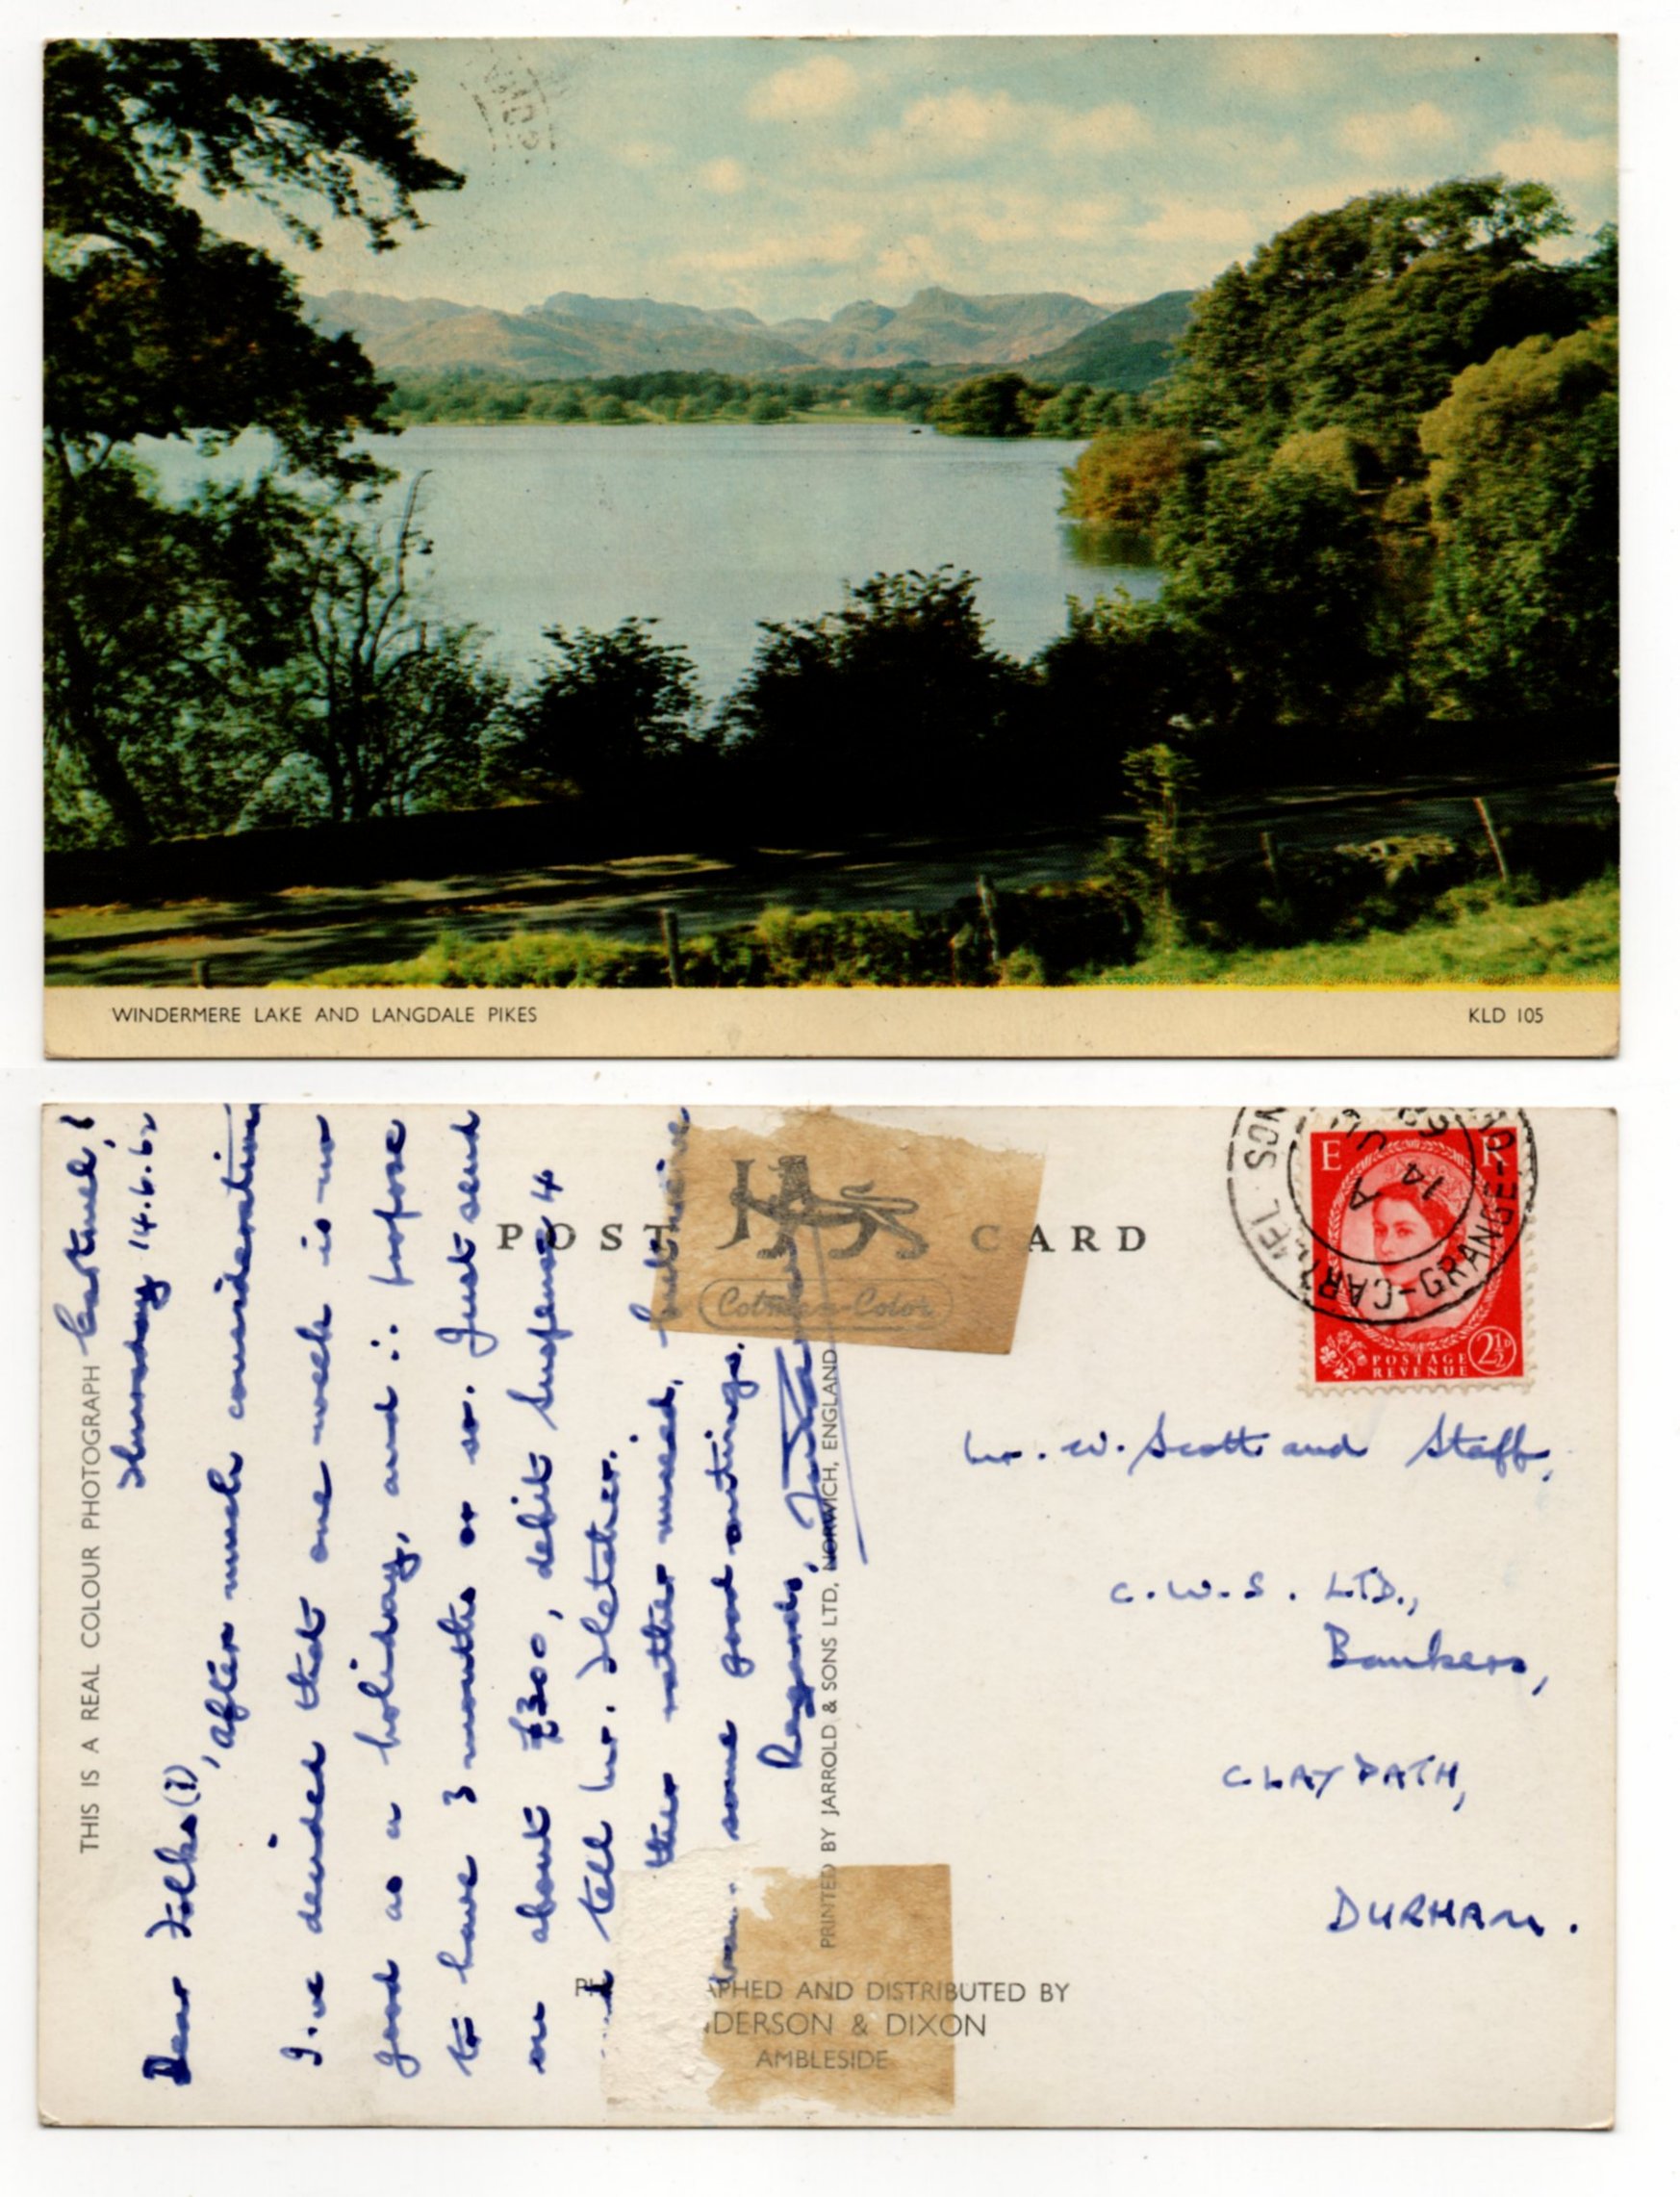 Windermere Lake And Langdale Pikes JW0067.jpg  by whitetaylor